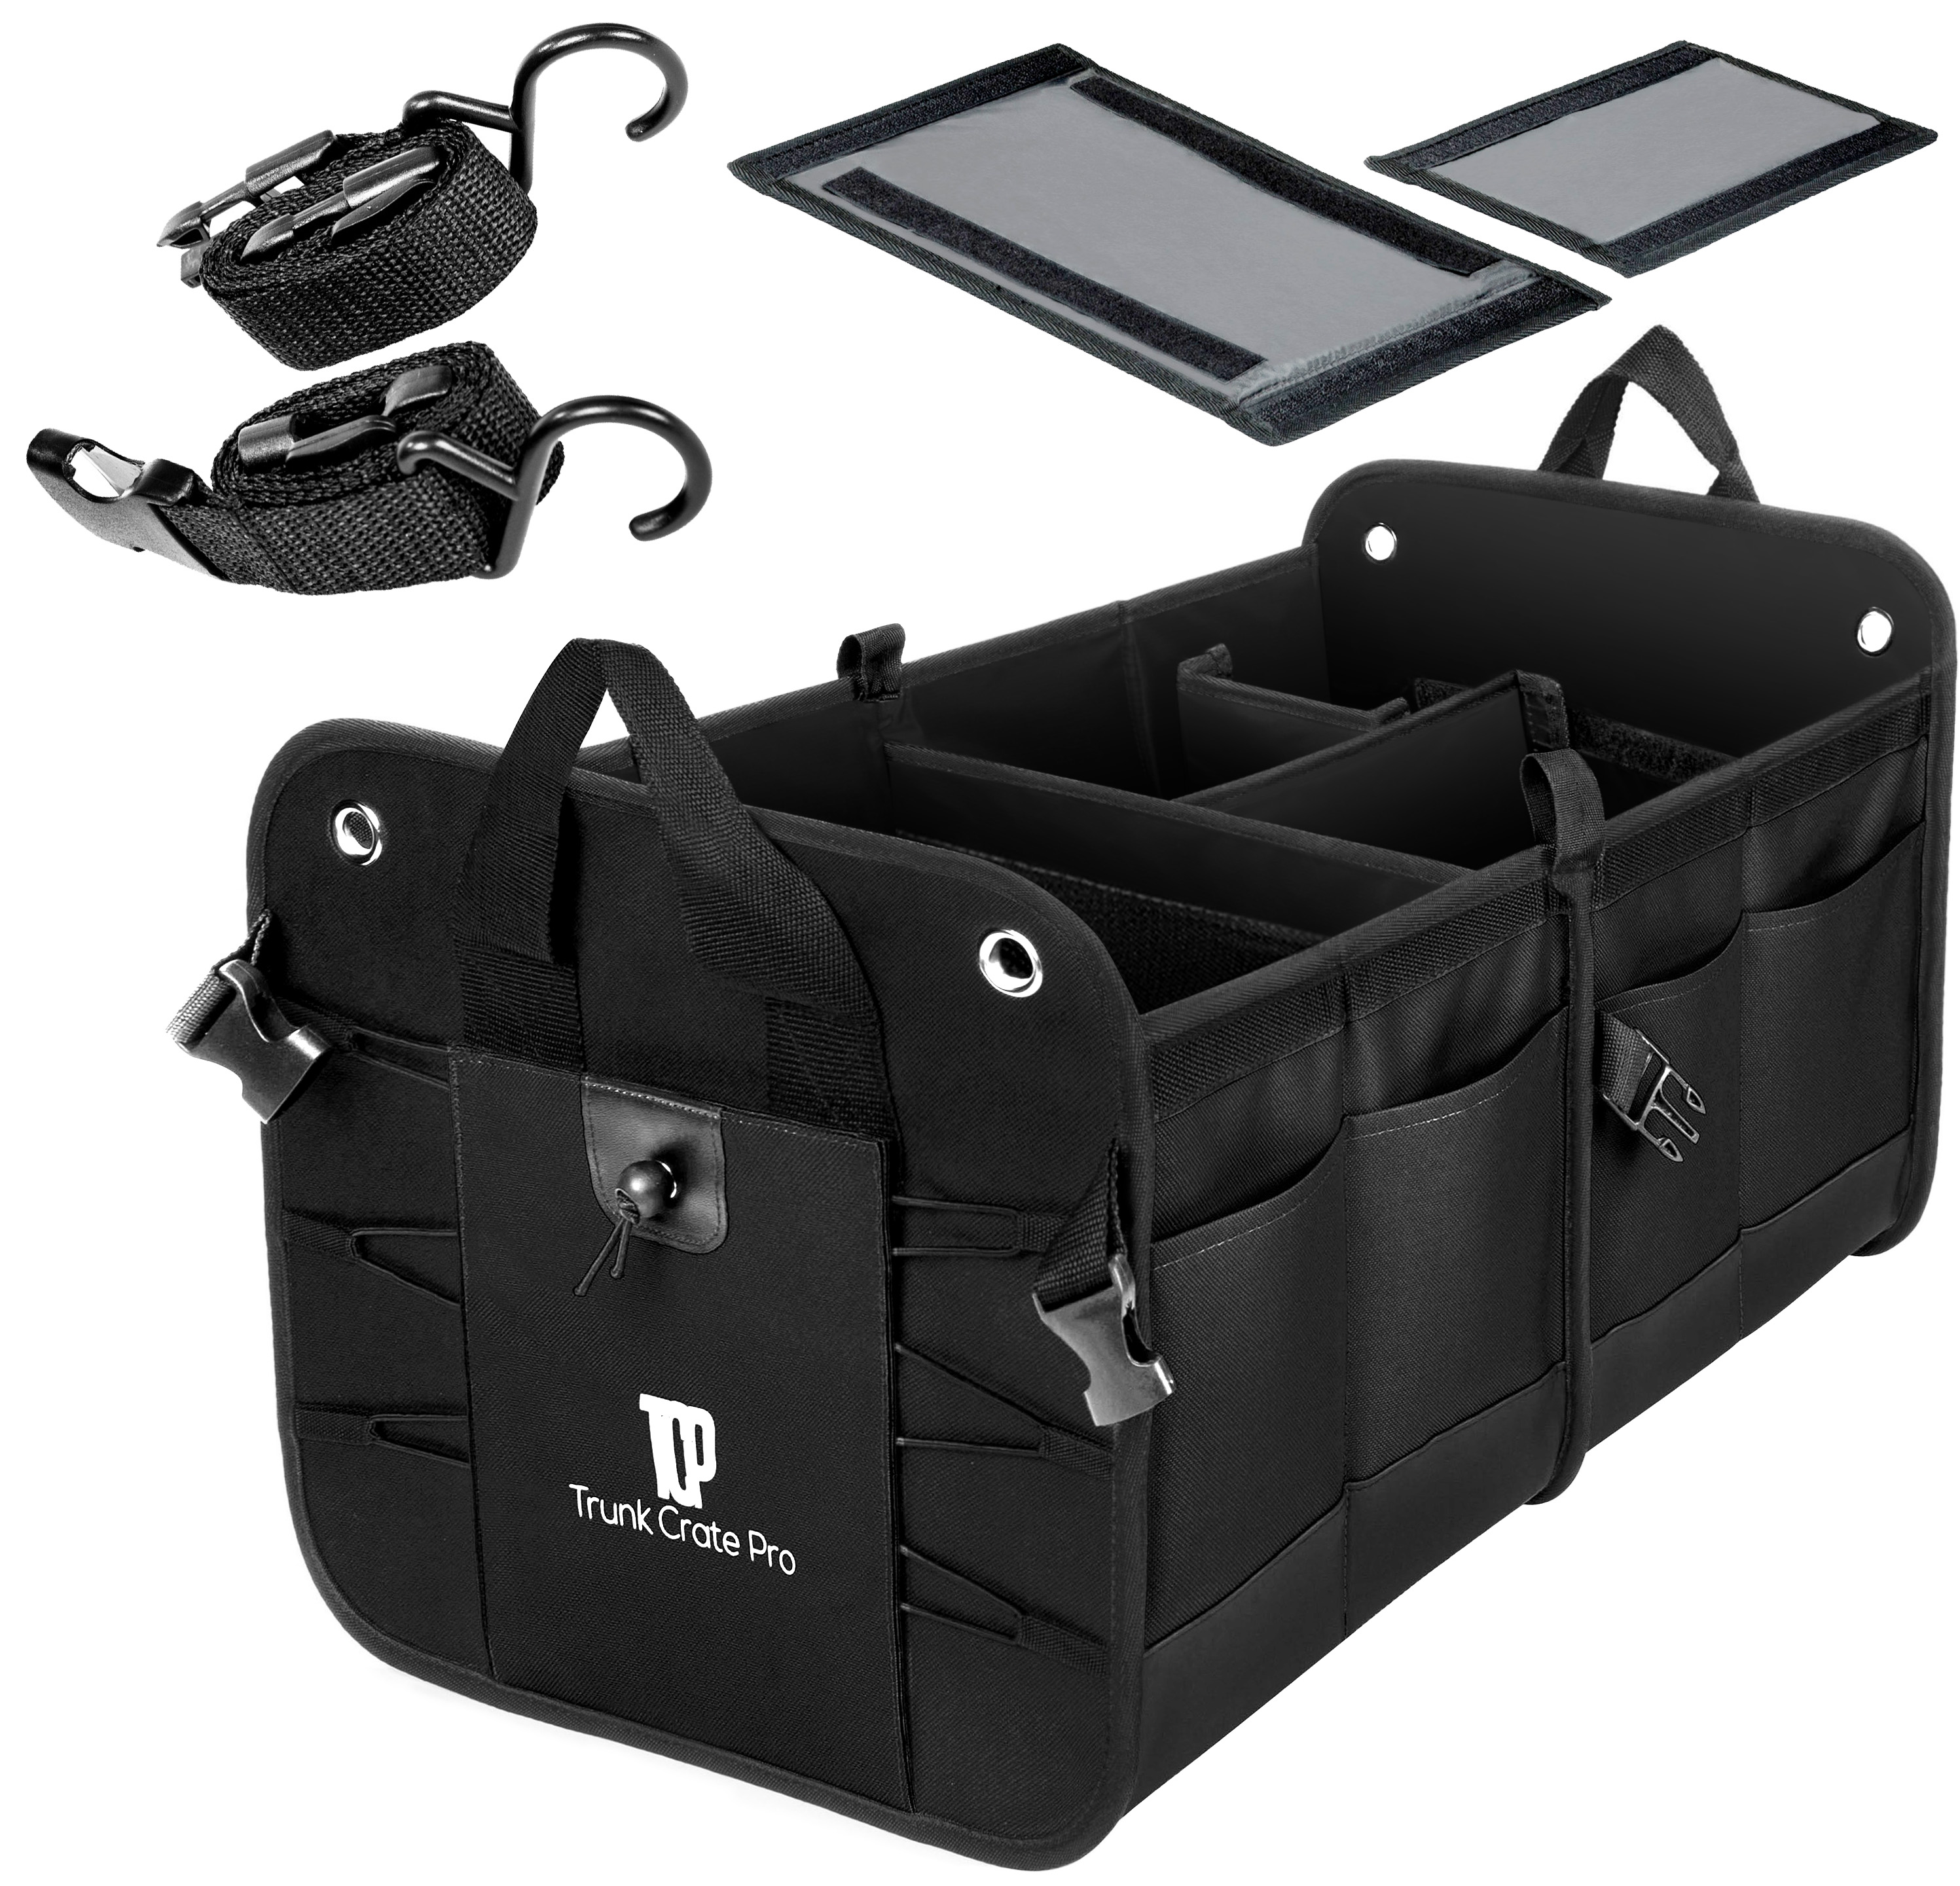 Trunk Organizers with Shoulder Strap - meori Black collapsible